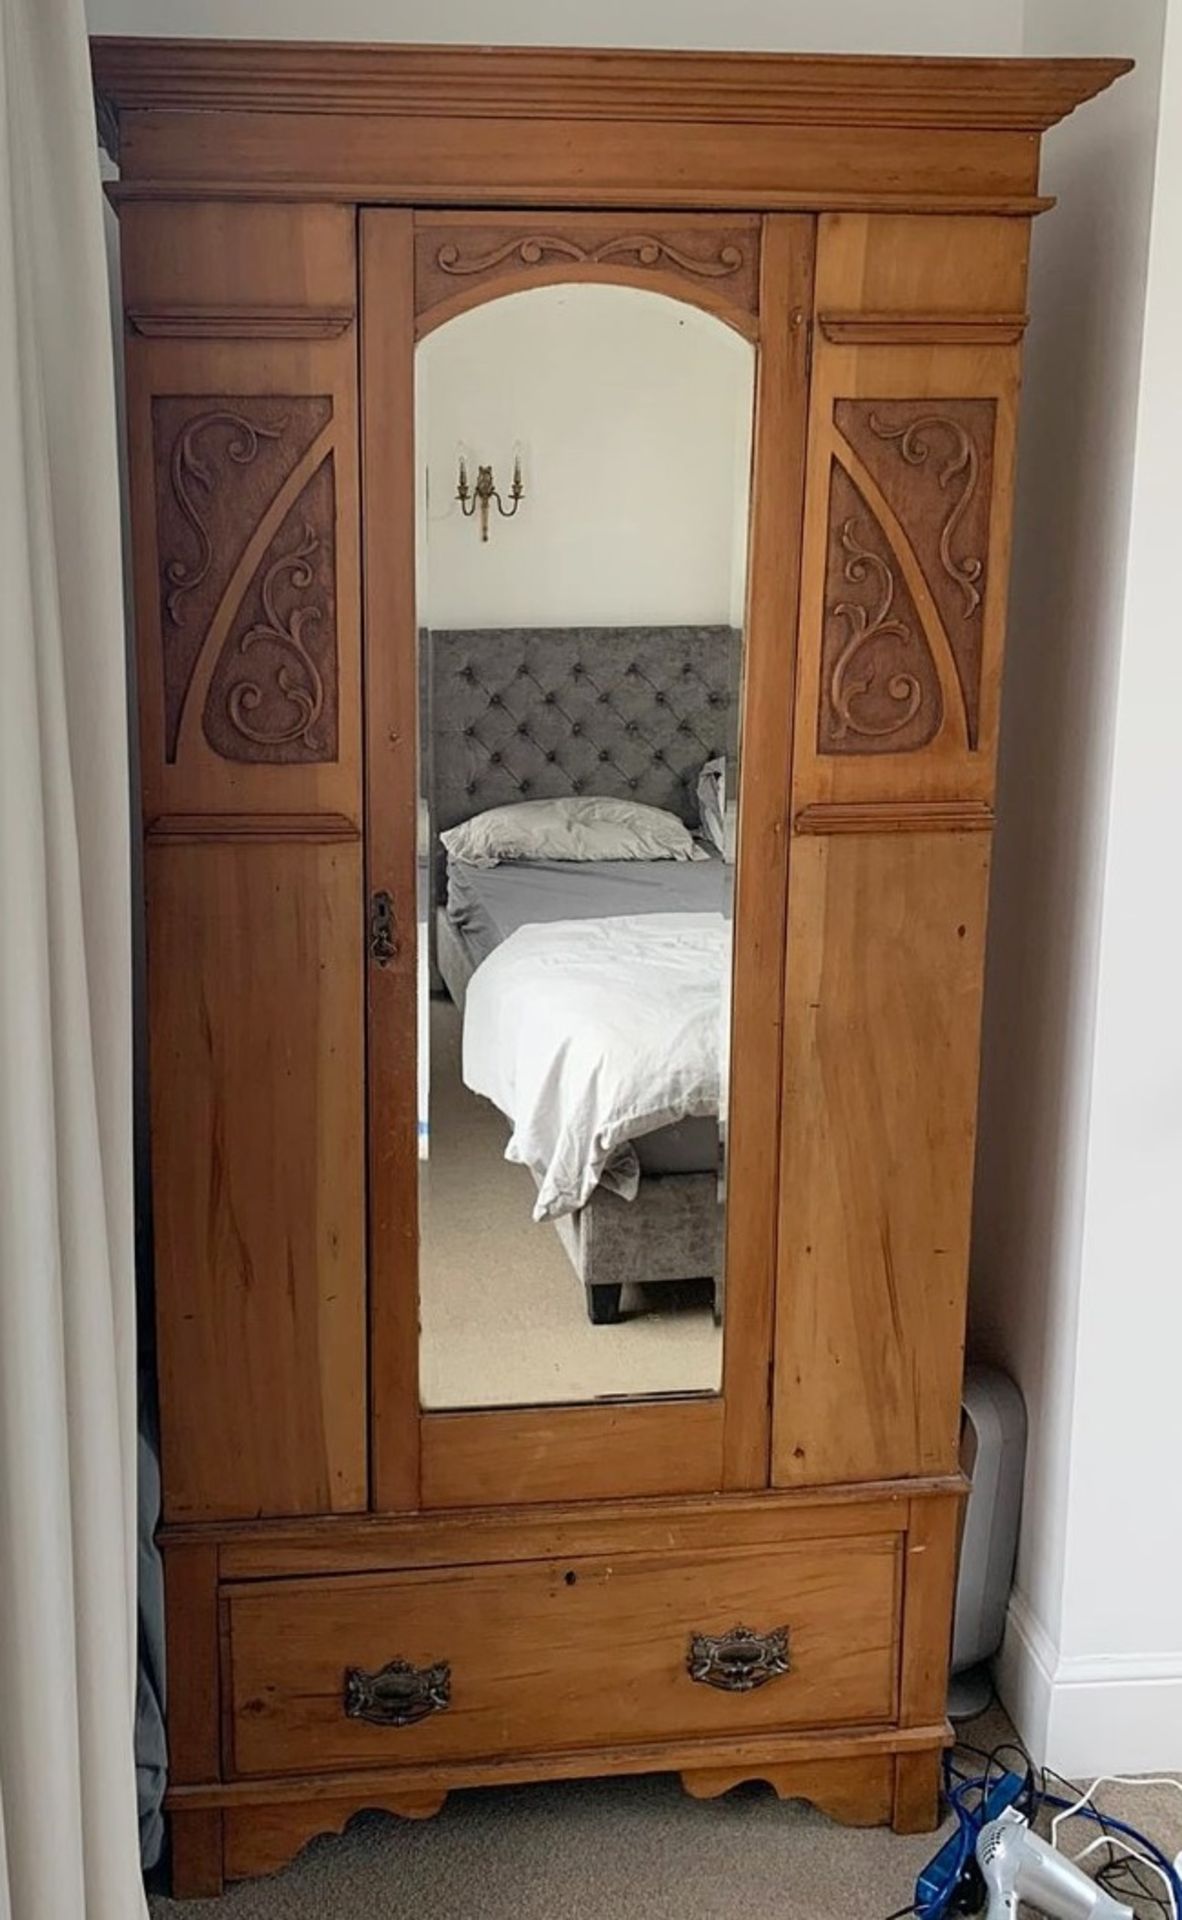 1 x Solid Wood 1-Door, 1-Drawer Wardrobe With Art Nouveau Style Carving On The Front - Dimensions: